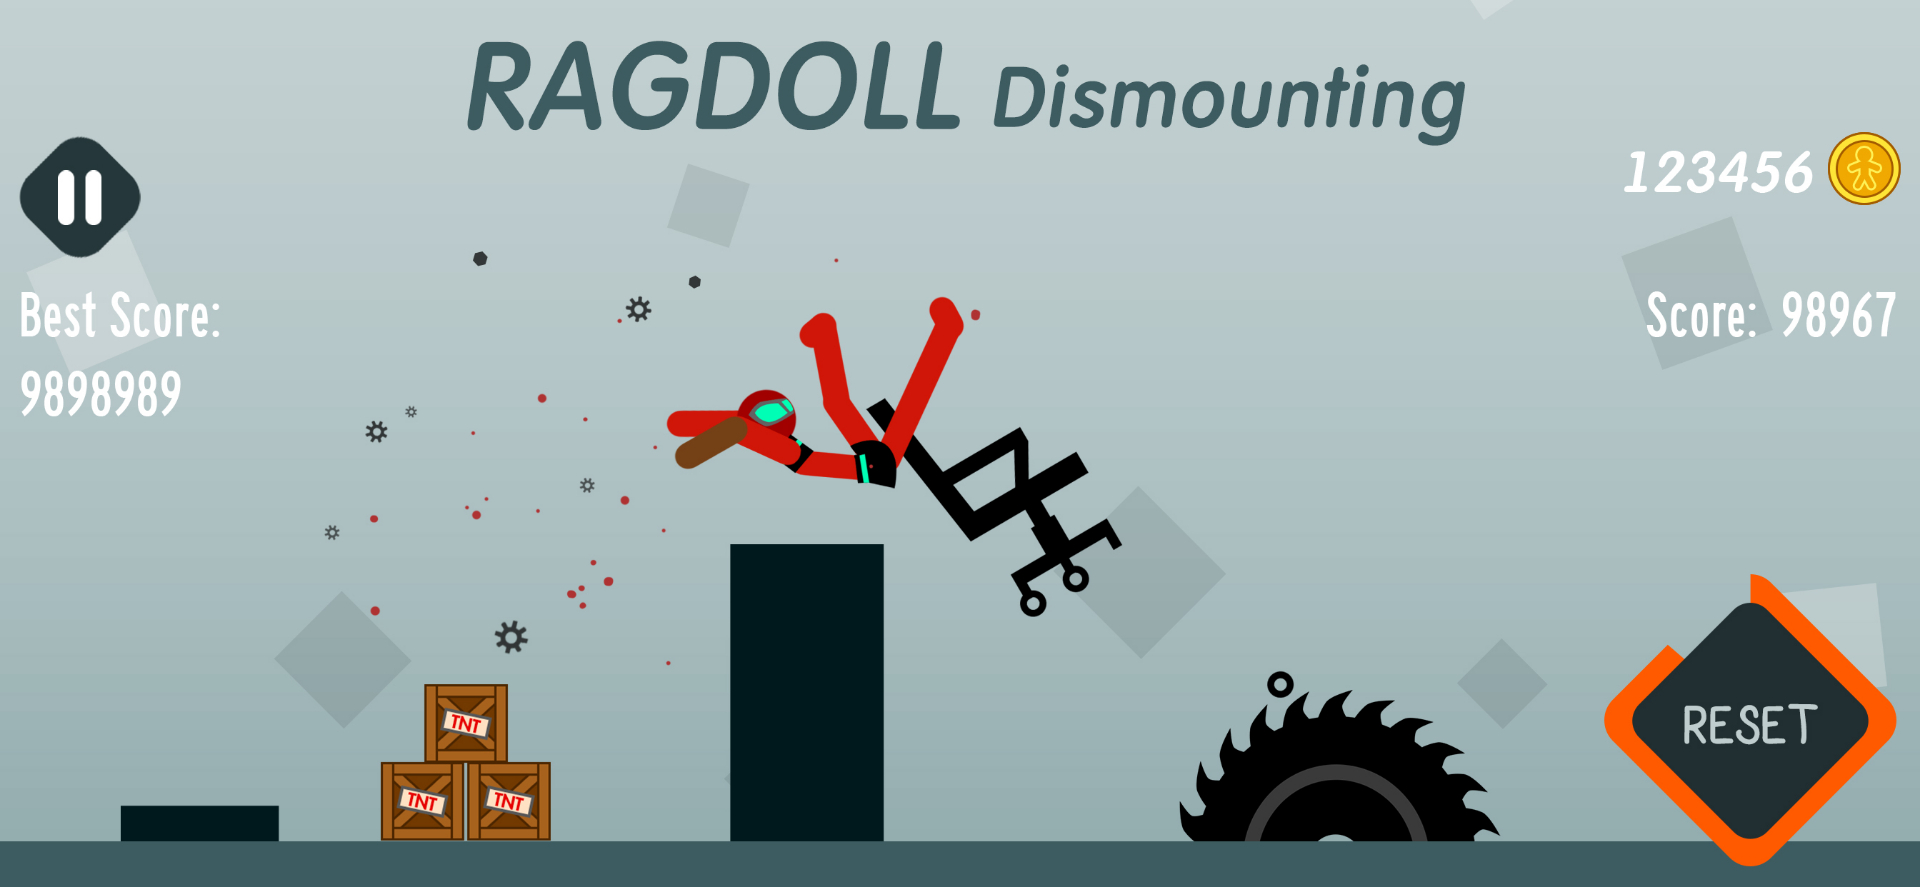 Ragdoll Dismounting - How to Get Coins